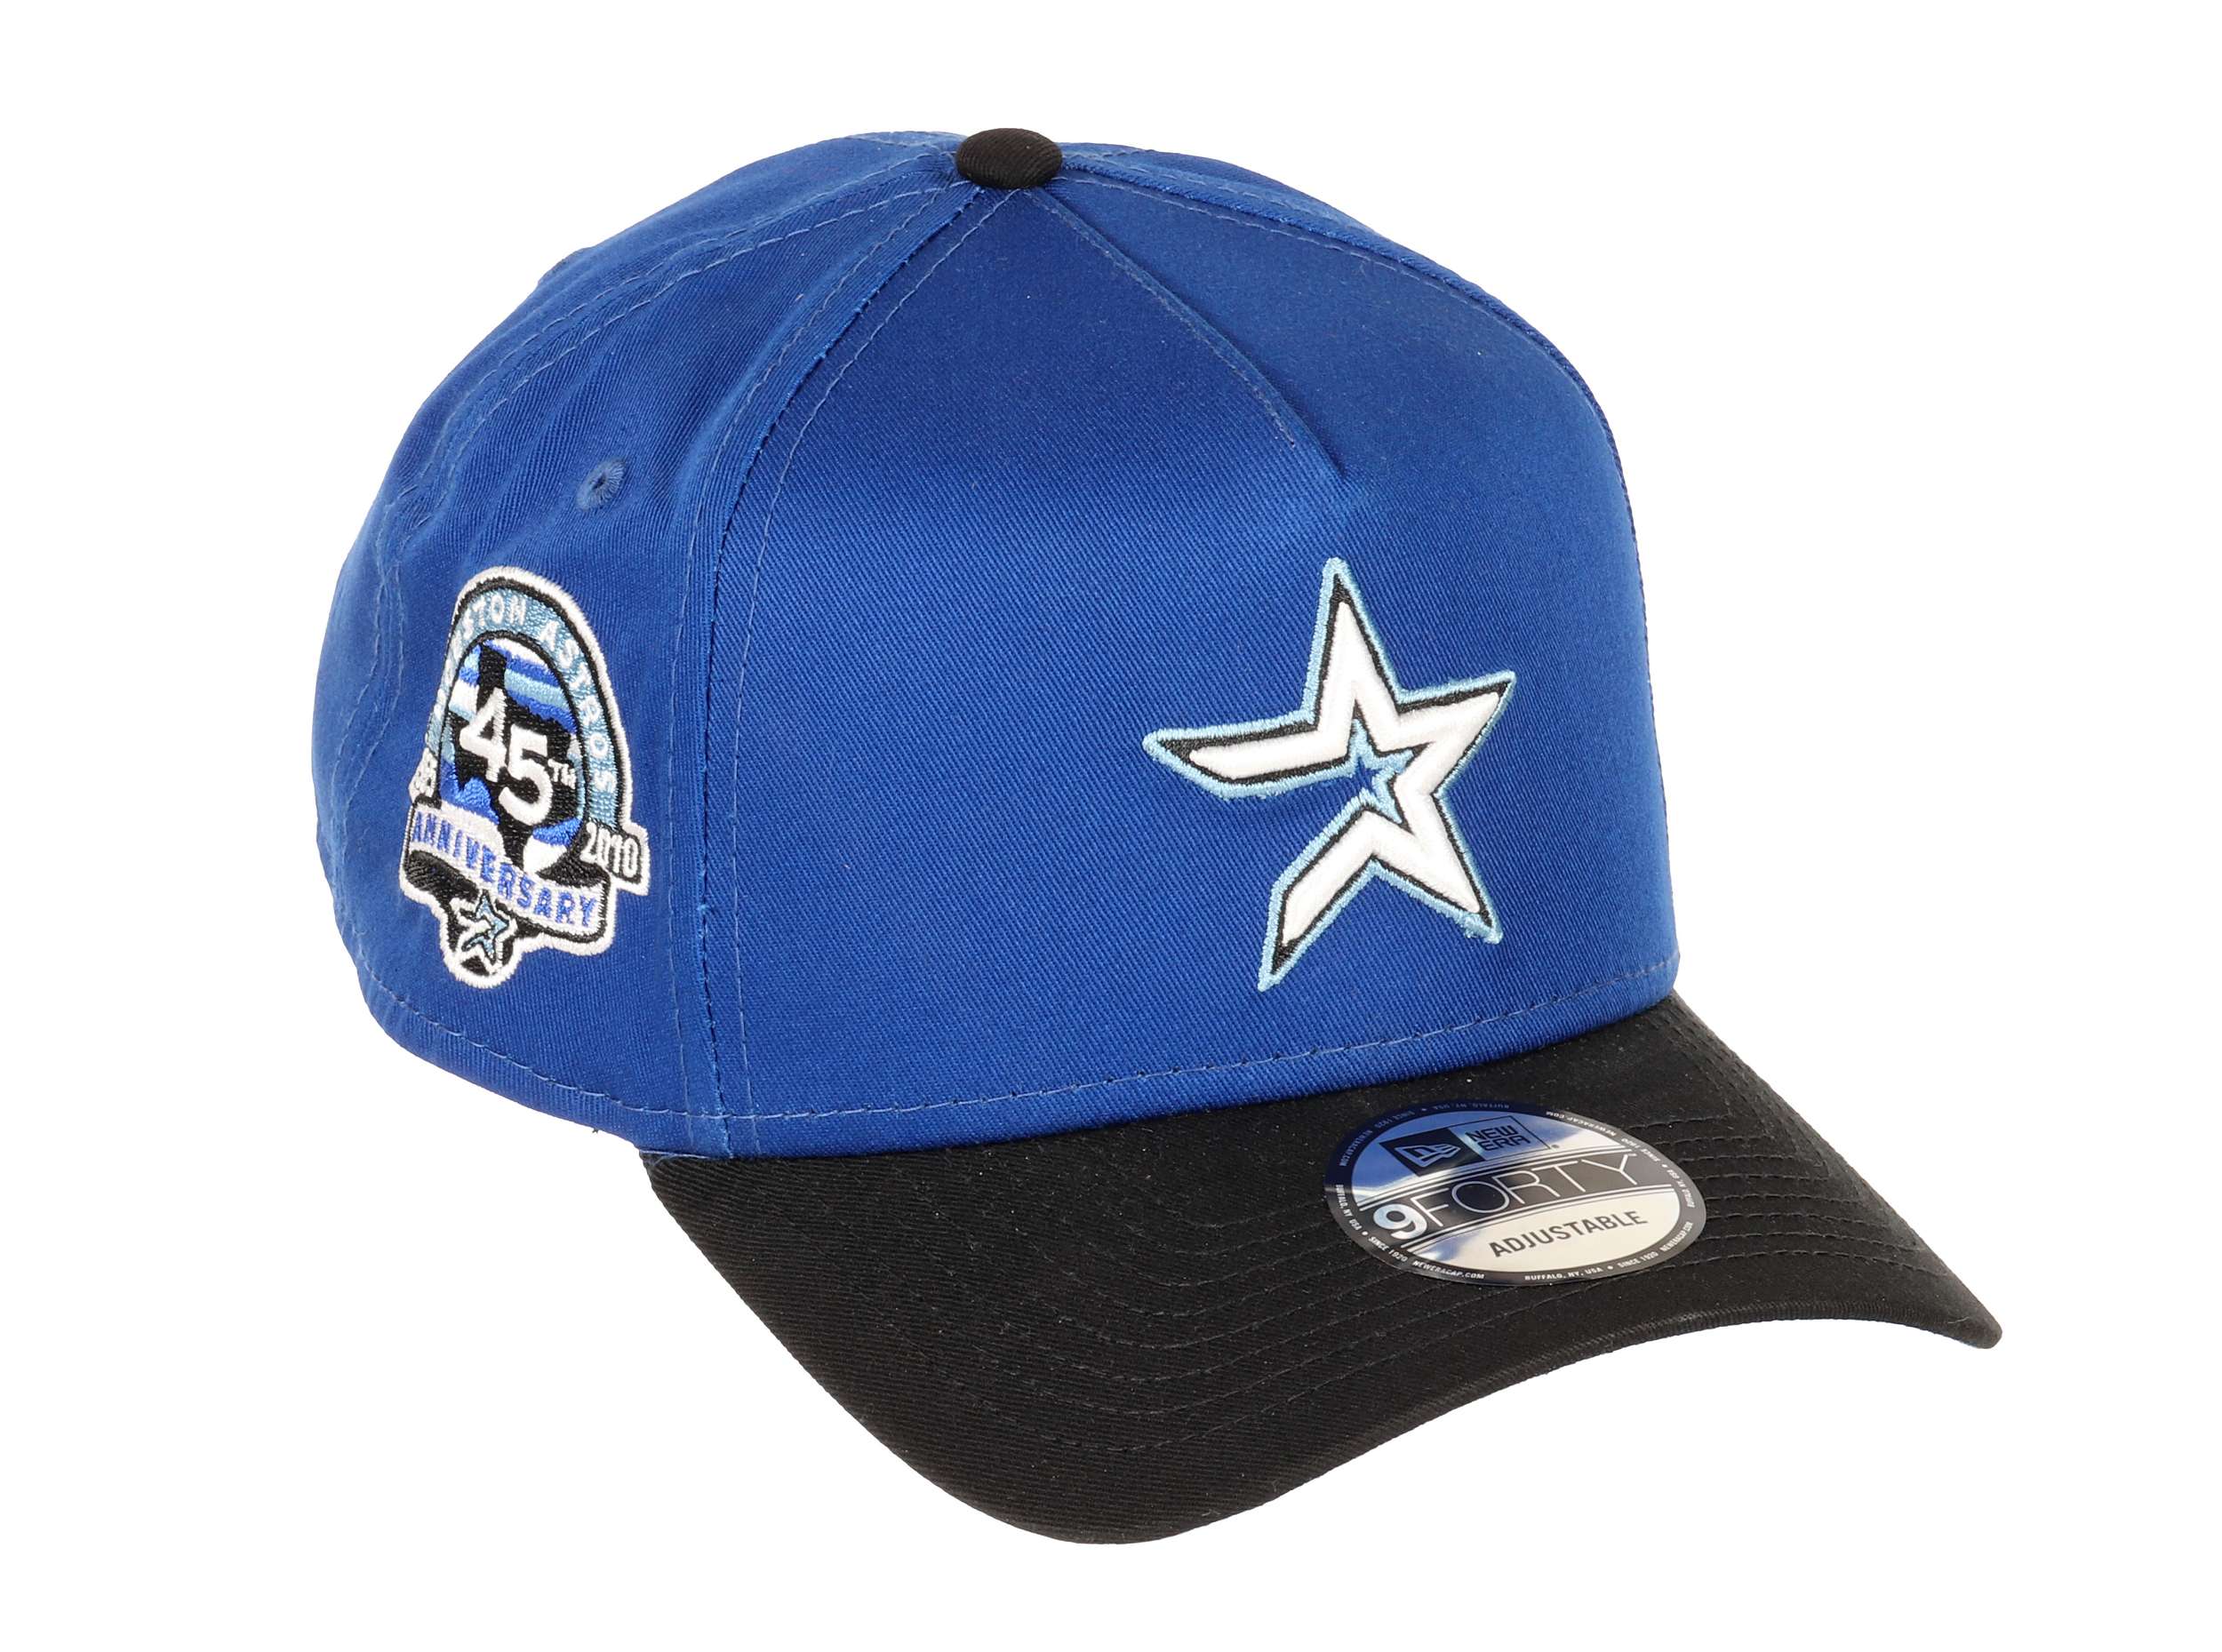 Houston Astros MLB 45th Anniversary Sidepatch Cooperstown Royal Blue Sky 9Forty A-Frame Snapback Cap New Era